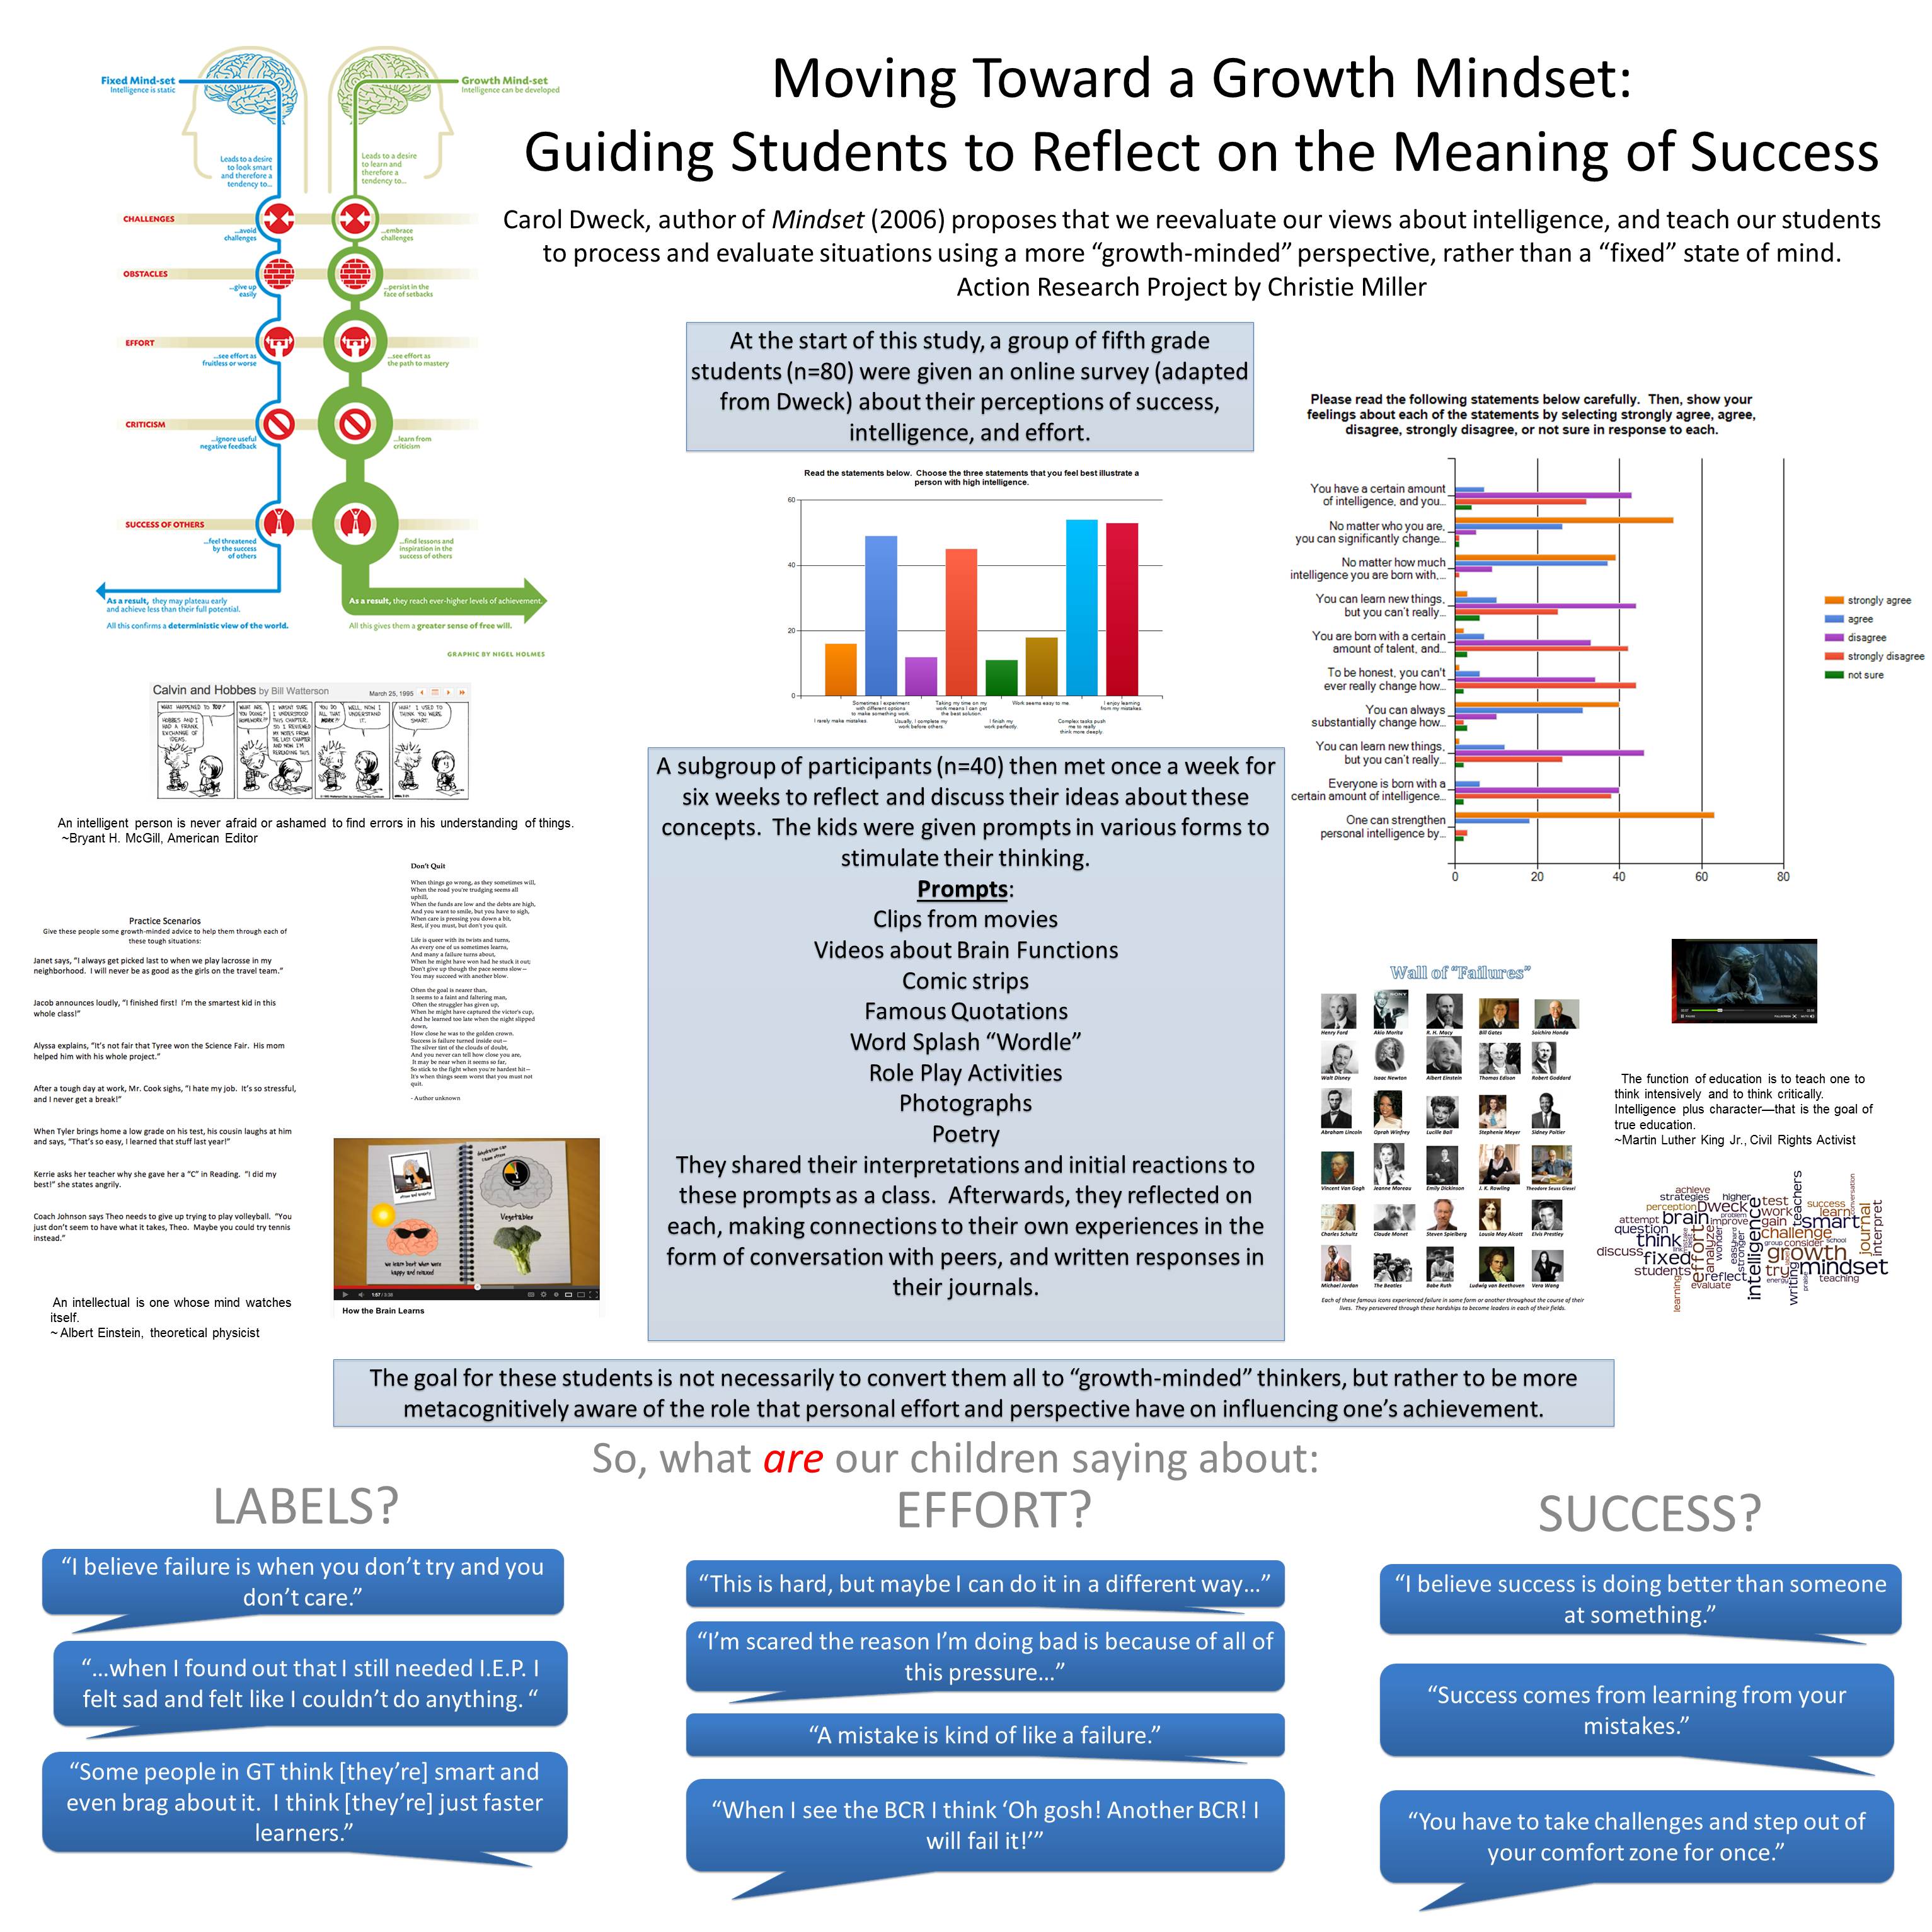 Enlarged poster image: Moving Toward a Growth Mindset: Guiding Students to Reflect on the Meaning of Success